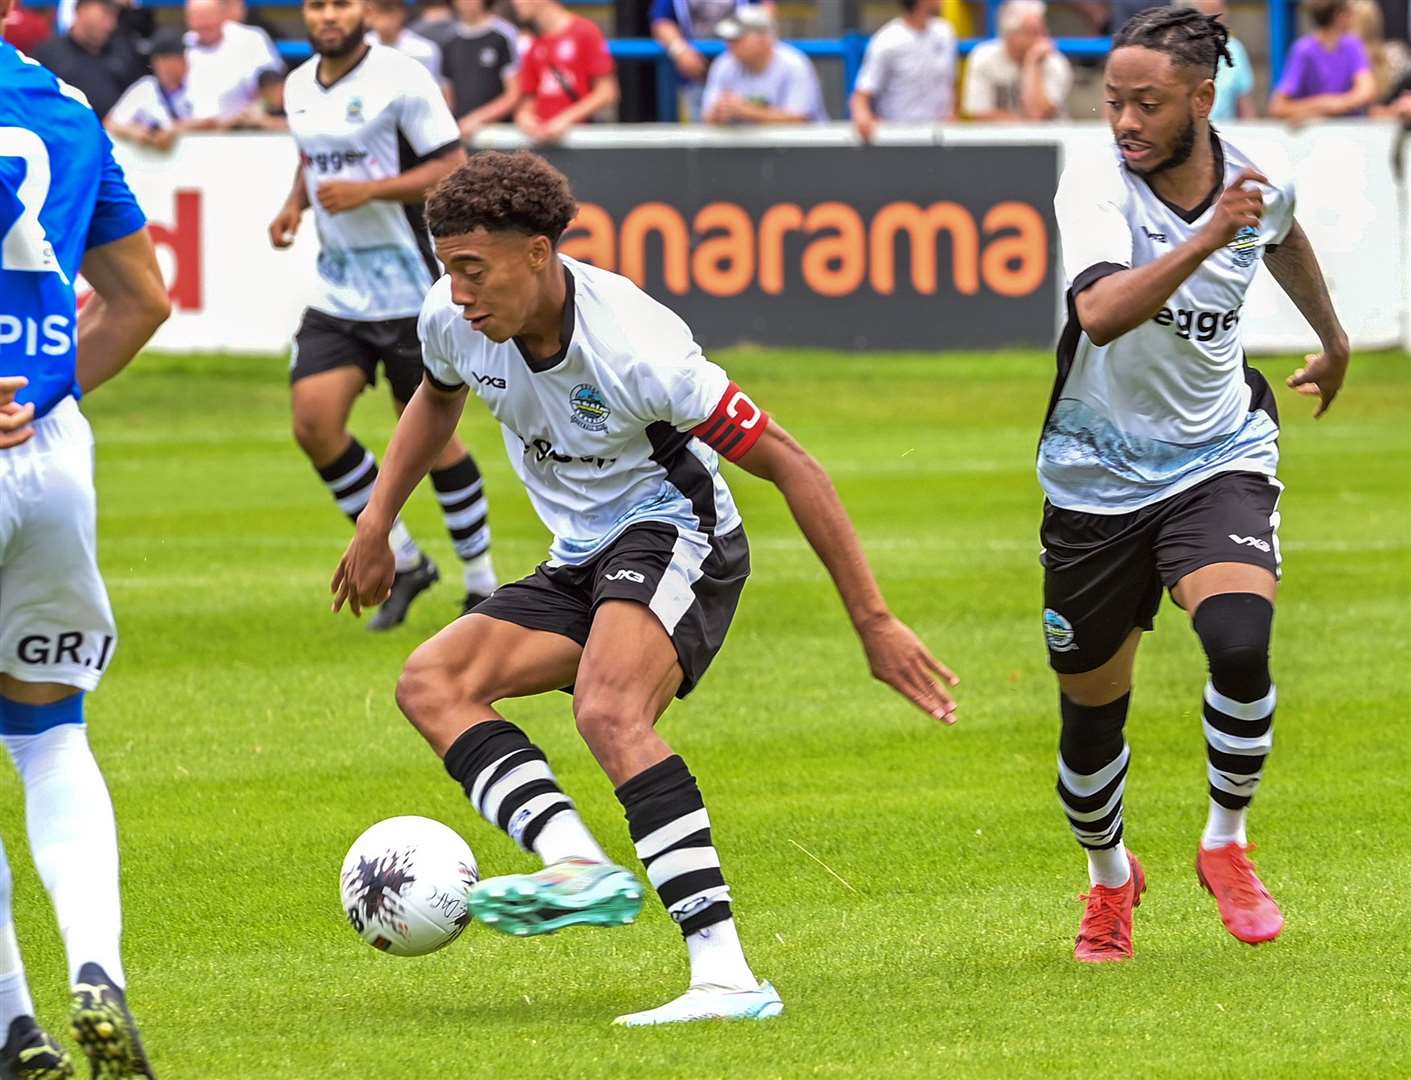 Dover’s Luke Baptiste, pictured on the ball, and Iffy Allen, in support, both scored in their weekend 3-2 FA Cup win against Hastings. Picture: Stuart Brock